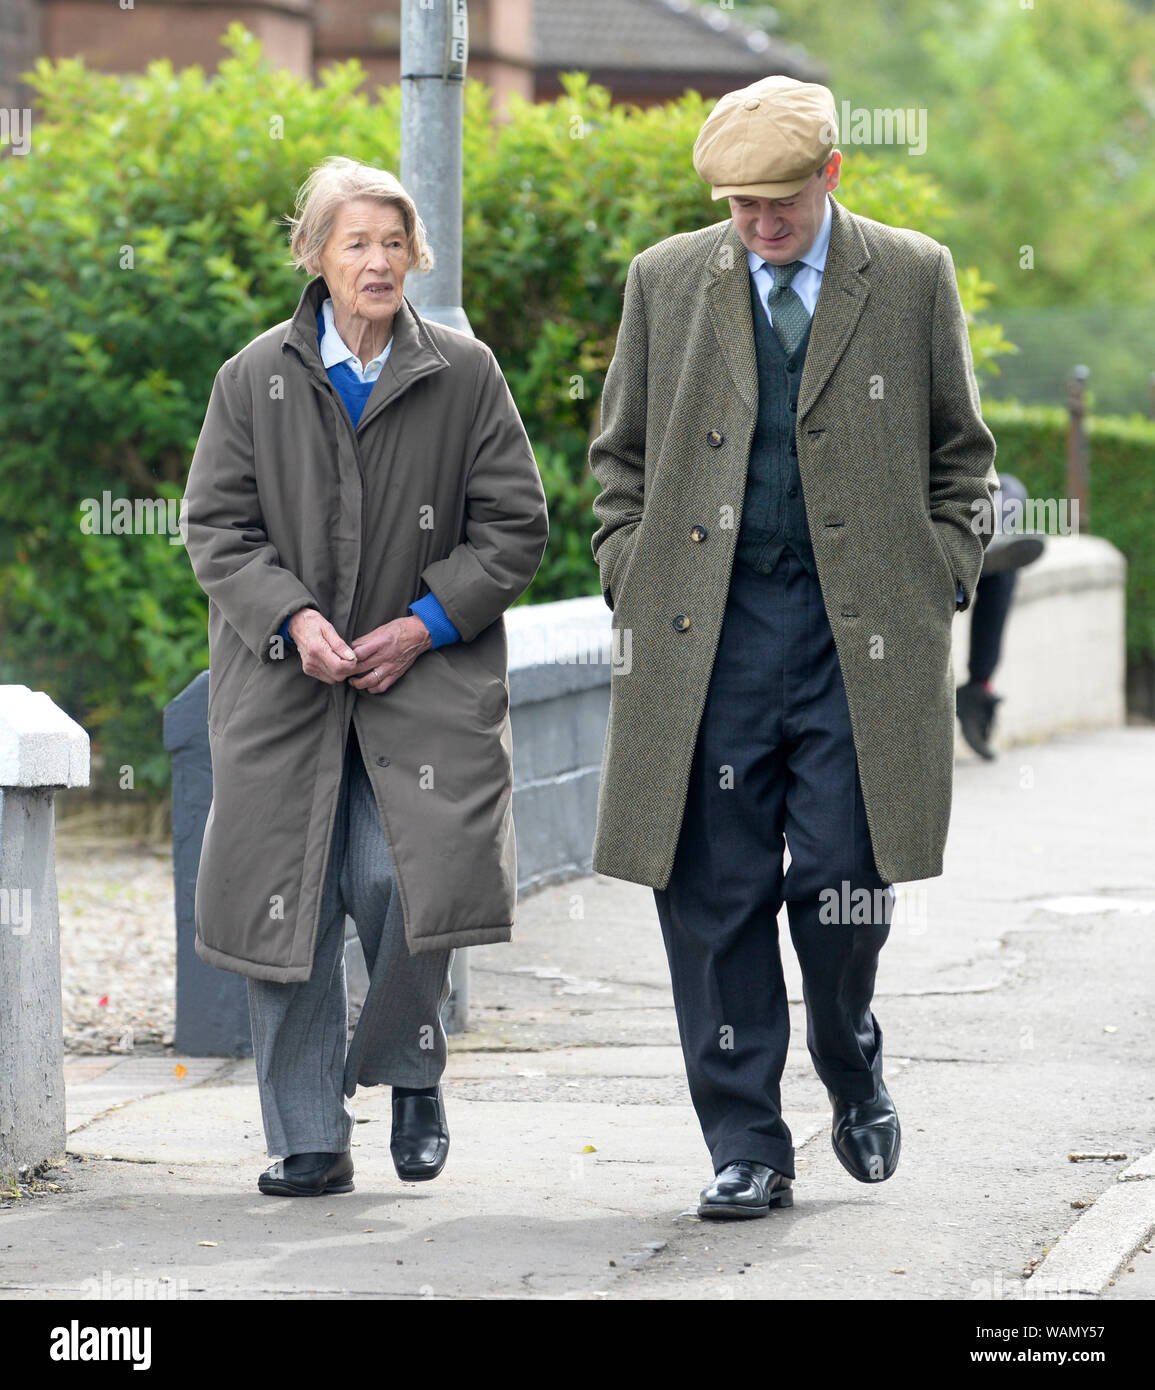 Johnstone, Renfrewshire, Scotland 21 August 2019. Oscar winner Glenda Jackson on set filming Elizabeth is Missing a one off BBC drama. In her first on screen role for 25 years Jackson plays Maud a dementia sufferer. Credit: Chris McNulty/Alamy Live News Stock Photo